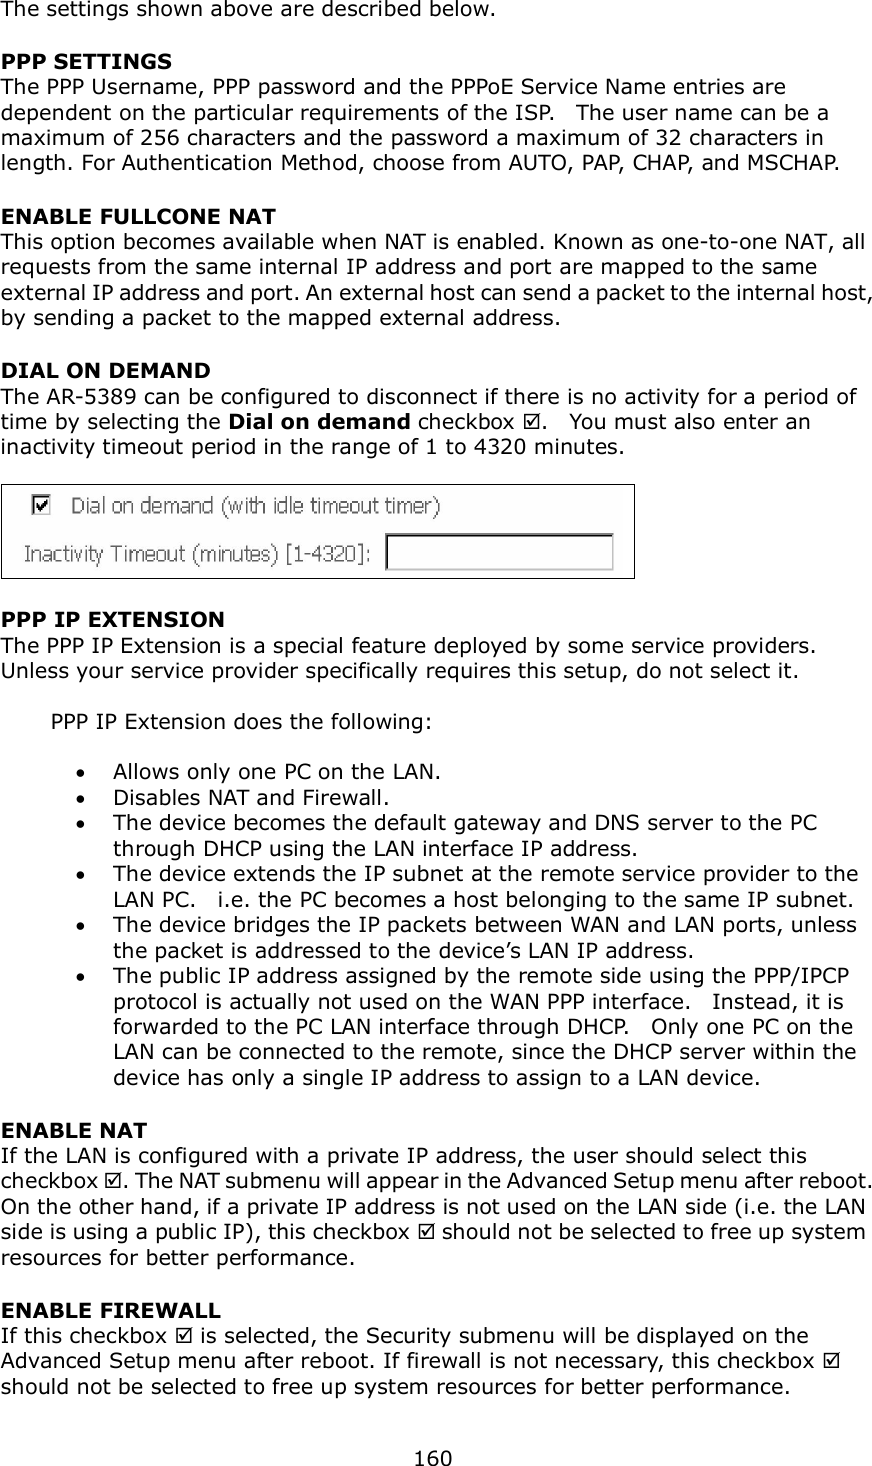  160  The settings shown above are described below. PPP SETTINGS The PPP Username, PPP password and the PPPoE Service Name entries are dependent on the particular requirements of the ISP.    The user name can be a maximum of 256 characters and the password a maximum of 32 characters in length. For Authentication Method, choose from AUTO, PAP, CHAP, and MSCHAP. ENABLE FULLCONE NAT This option becomes available when NAT is enabled. Known as one-to-one NAT, all requests from the same internal IP address and port are mapped to the same external IP address and port. An external host can send a packet to the internal host, by sending a packet to the mapped external address. DIAL ON DEMAND The AR-5389 can be configured to disconnect if there is no activity for a period of time by selecting the Dial on demand checkbox .    You must also enter an inactivity timeout period in the range of 1 to 4320 minutes.       PPP IP EXTENSION The PPP IP Extension is a special feature deployed by some service providers.   Unless your service provider specifically requires this setup, do not select it.    PPP IP Extension does the following:   Allows only one PC on the LAN.  Disables NAT and Firewall.  The device becomes the default gateway and DNS server to the PC through DHCP using the LAN interface IP address.  The device extends the IP subnet at the remote service provider to the LAN PC.    i.e. the PC becomes a host belonging to the same IP subnet.  The device bridges the IP packets between WAN and LAN ports, unless the packet is addressed to the device’s LAN IP address.  The public IP address assigned by the remote side using the PPP/IPCP protocol is actually not used on the WAN PPP interface.    Instead, it is forwarded to the PC LAN interface through DHCP.    Only one PC on the LAN can be connected to the remote, since the DHCP server within the device has only a single IP address to assign to a LAN device. ENABLE NAT If the LAN is configured with a private IP address, the user should select this checkbox . The NAT submenu will appear in the Advanced Setup menu after reboot.   On the other hand, if a private IP address is not used on the LAN side (i.e. the LAN side is using a public IP), this checkbox  should not be selected to free up system resources for better performance.     ENABLE FIREWALL If this checkbox  is selected, the Security submenu will be displayed on the Advanced Setup menu after reboot. If firewall is not necessary, this checkbox  should not be selected to free up system resources for better performance.     